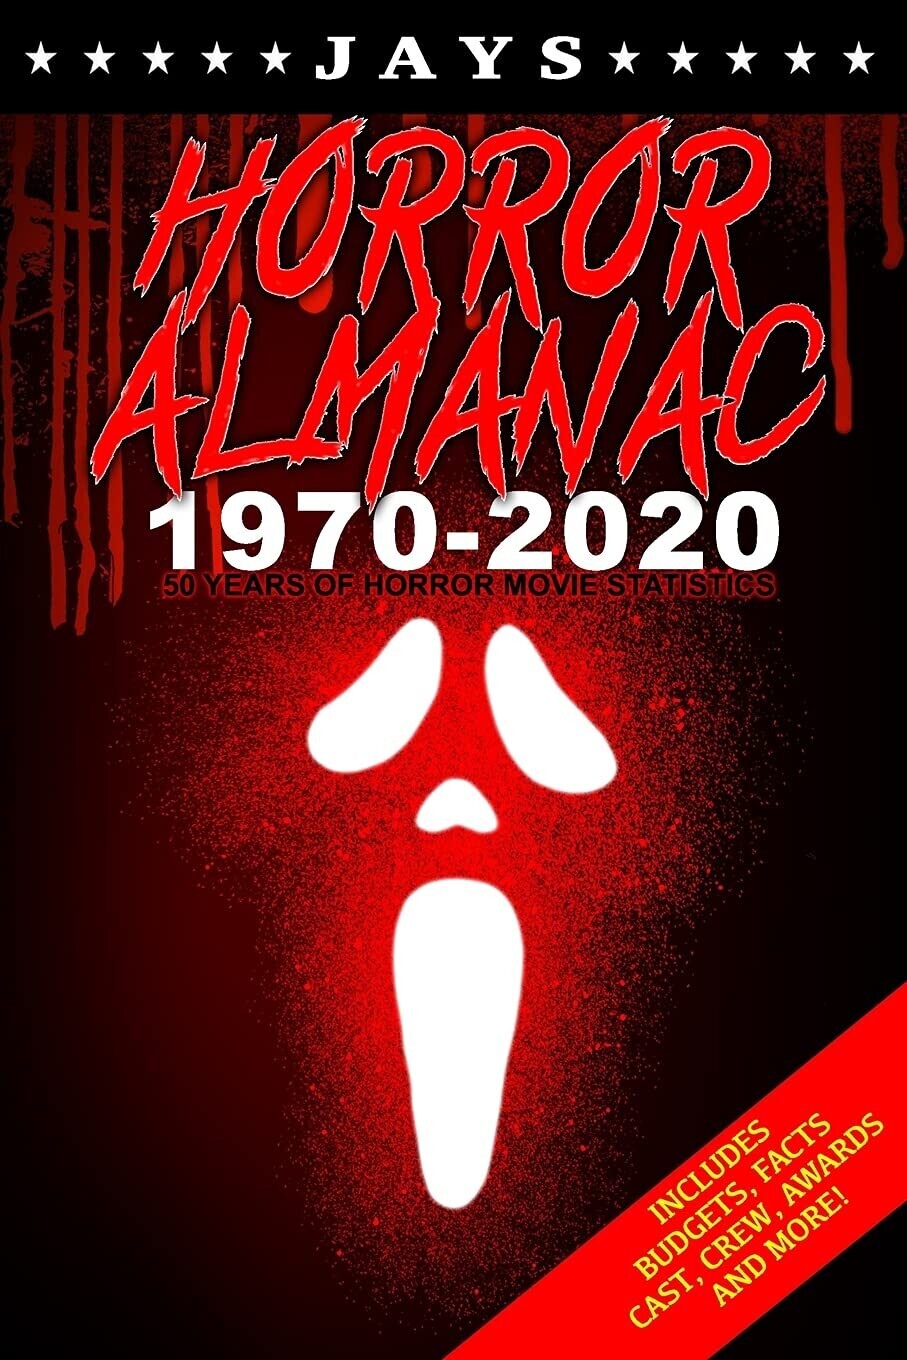 Jays Horror Almanac #1 - 50 Years of Horror Movie Statistics Book (Includes Budgets, Facts, Cast, Crew, Awards & More)